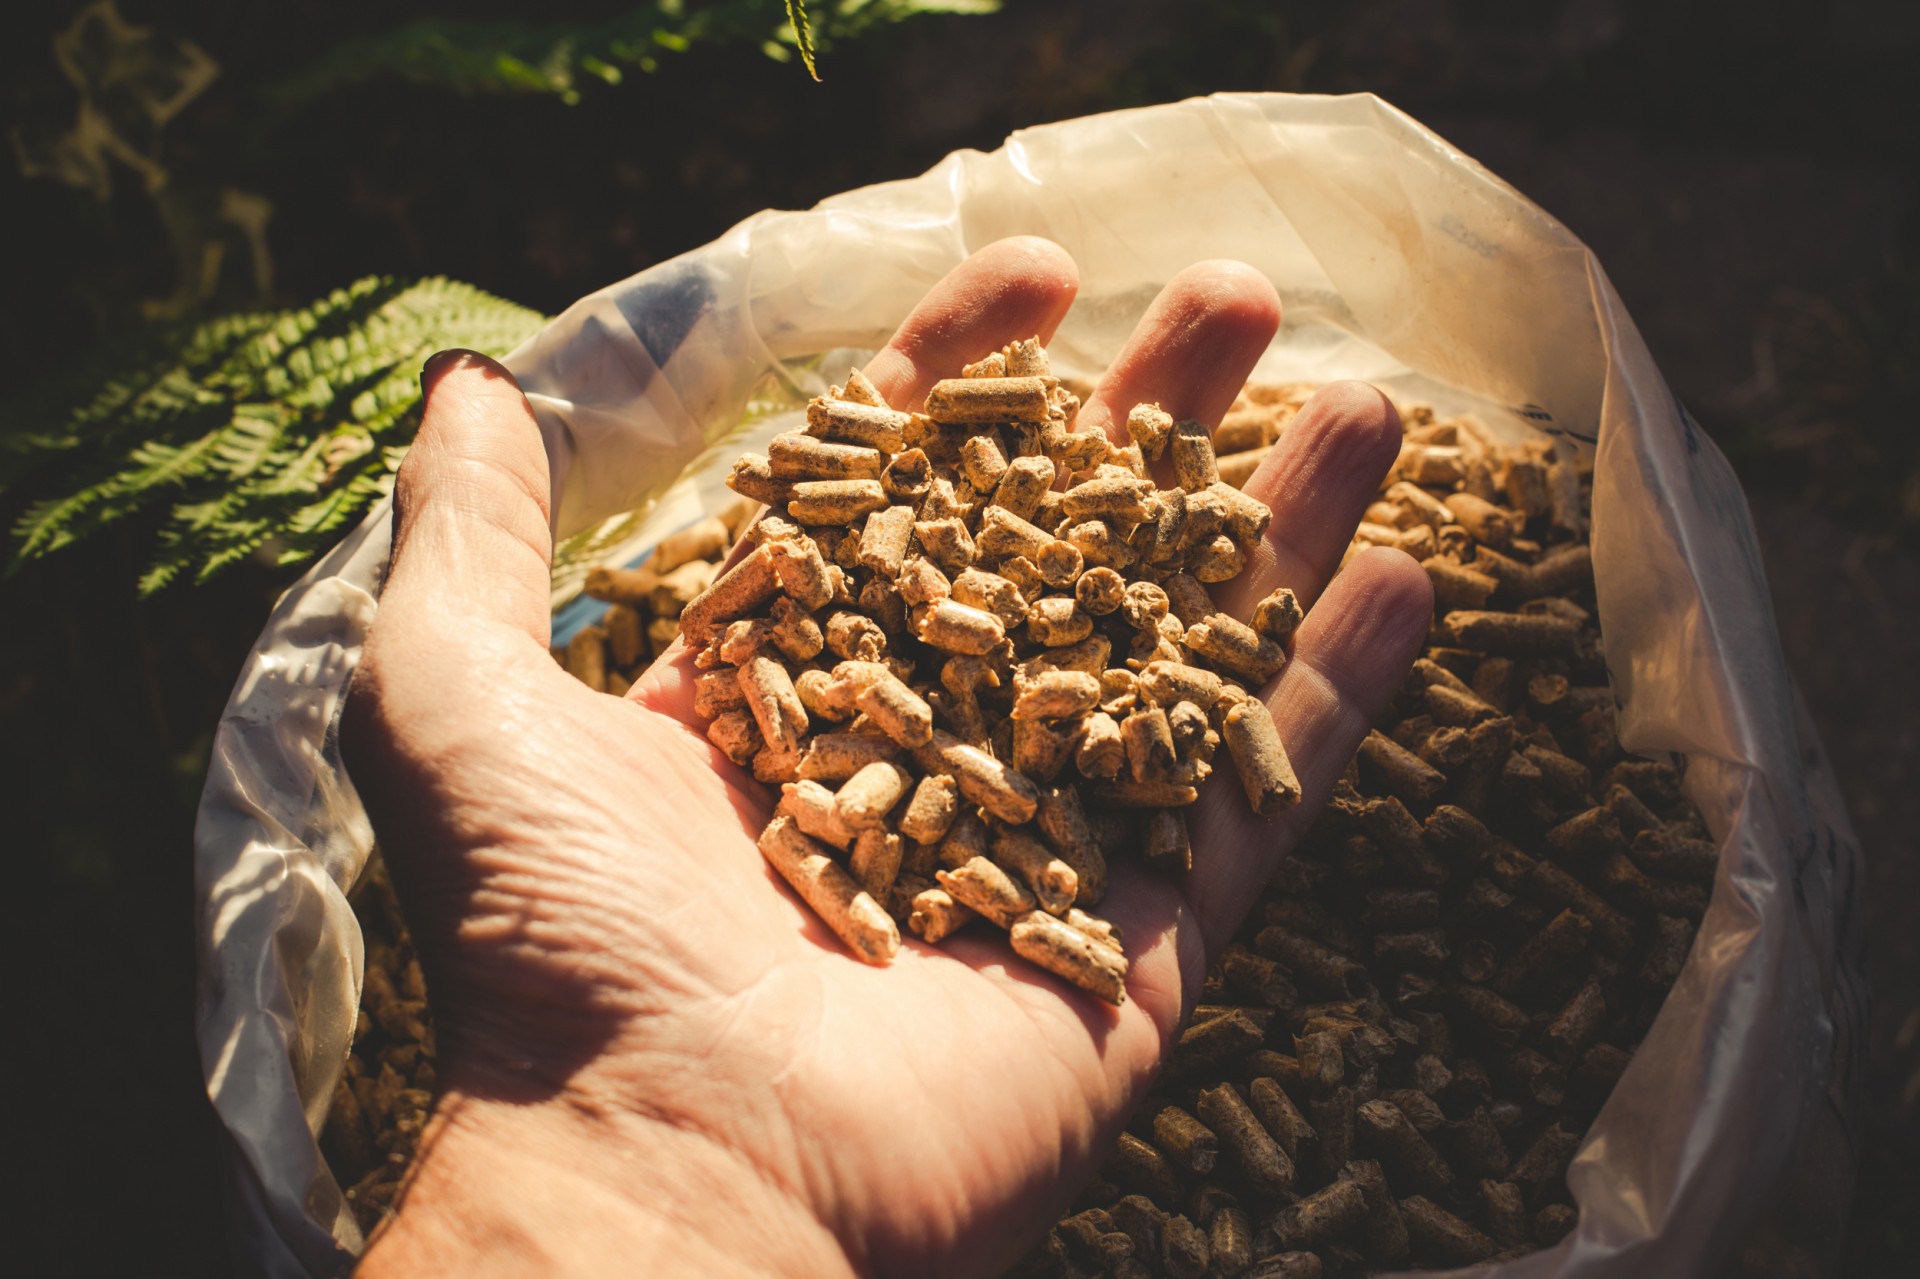 Wood pellets are a common fuel in wood heating systems.